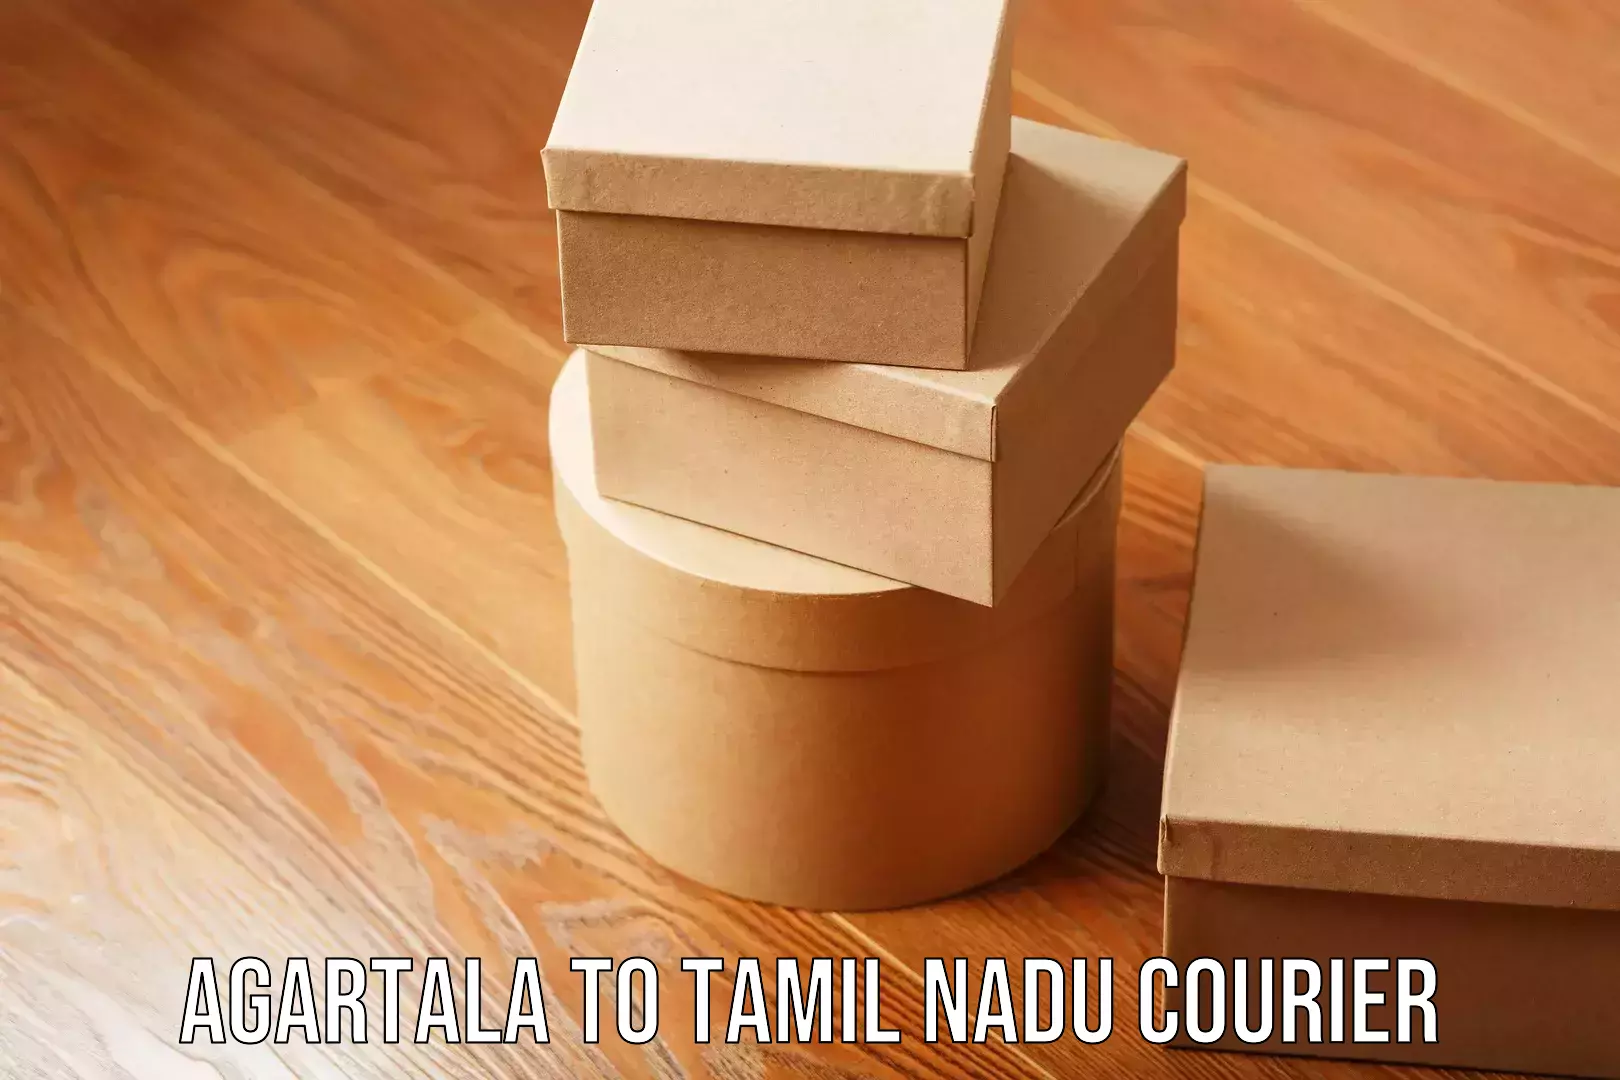 24-hour delivery options Agartala to Tamil Nadu